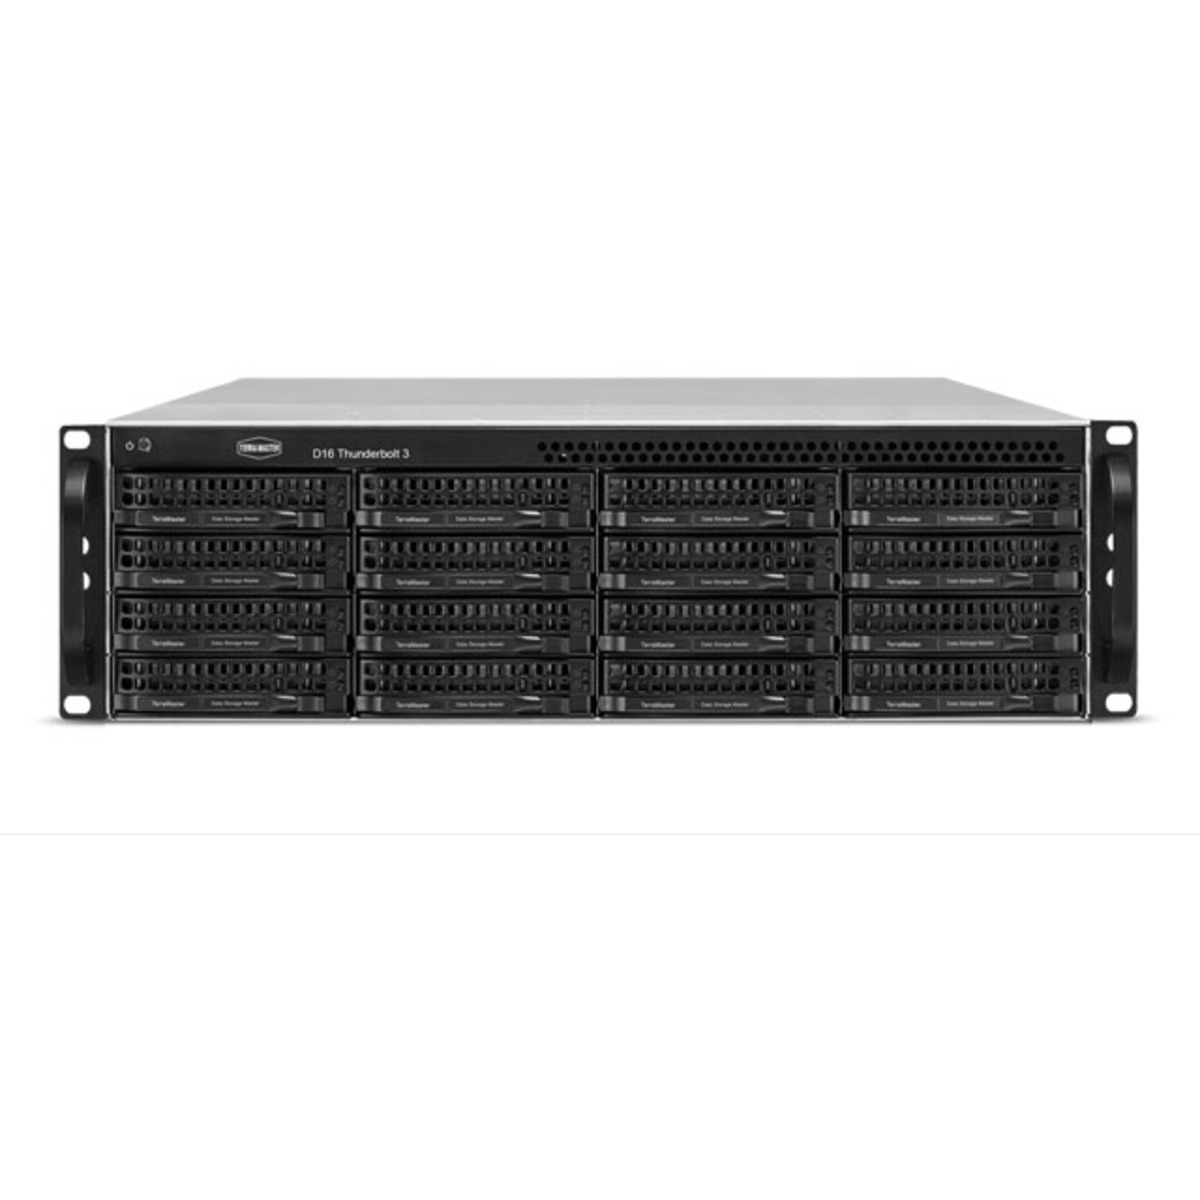 TerraMaster D16 Thunderbolt 3 80tb 16-Bay RackMount Multimedia / Power User / Business DAS - Direct Attached Storage Device 10x8tb Western Digital Red Pro WD8003FFBX 3.5 7200rpm SATA 6Gb/s HDD NAS Class Drives Installed - Burn-In Tested D16 Thunderbolt 3